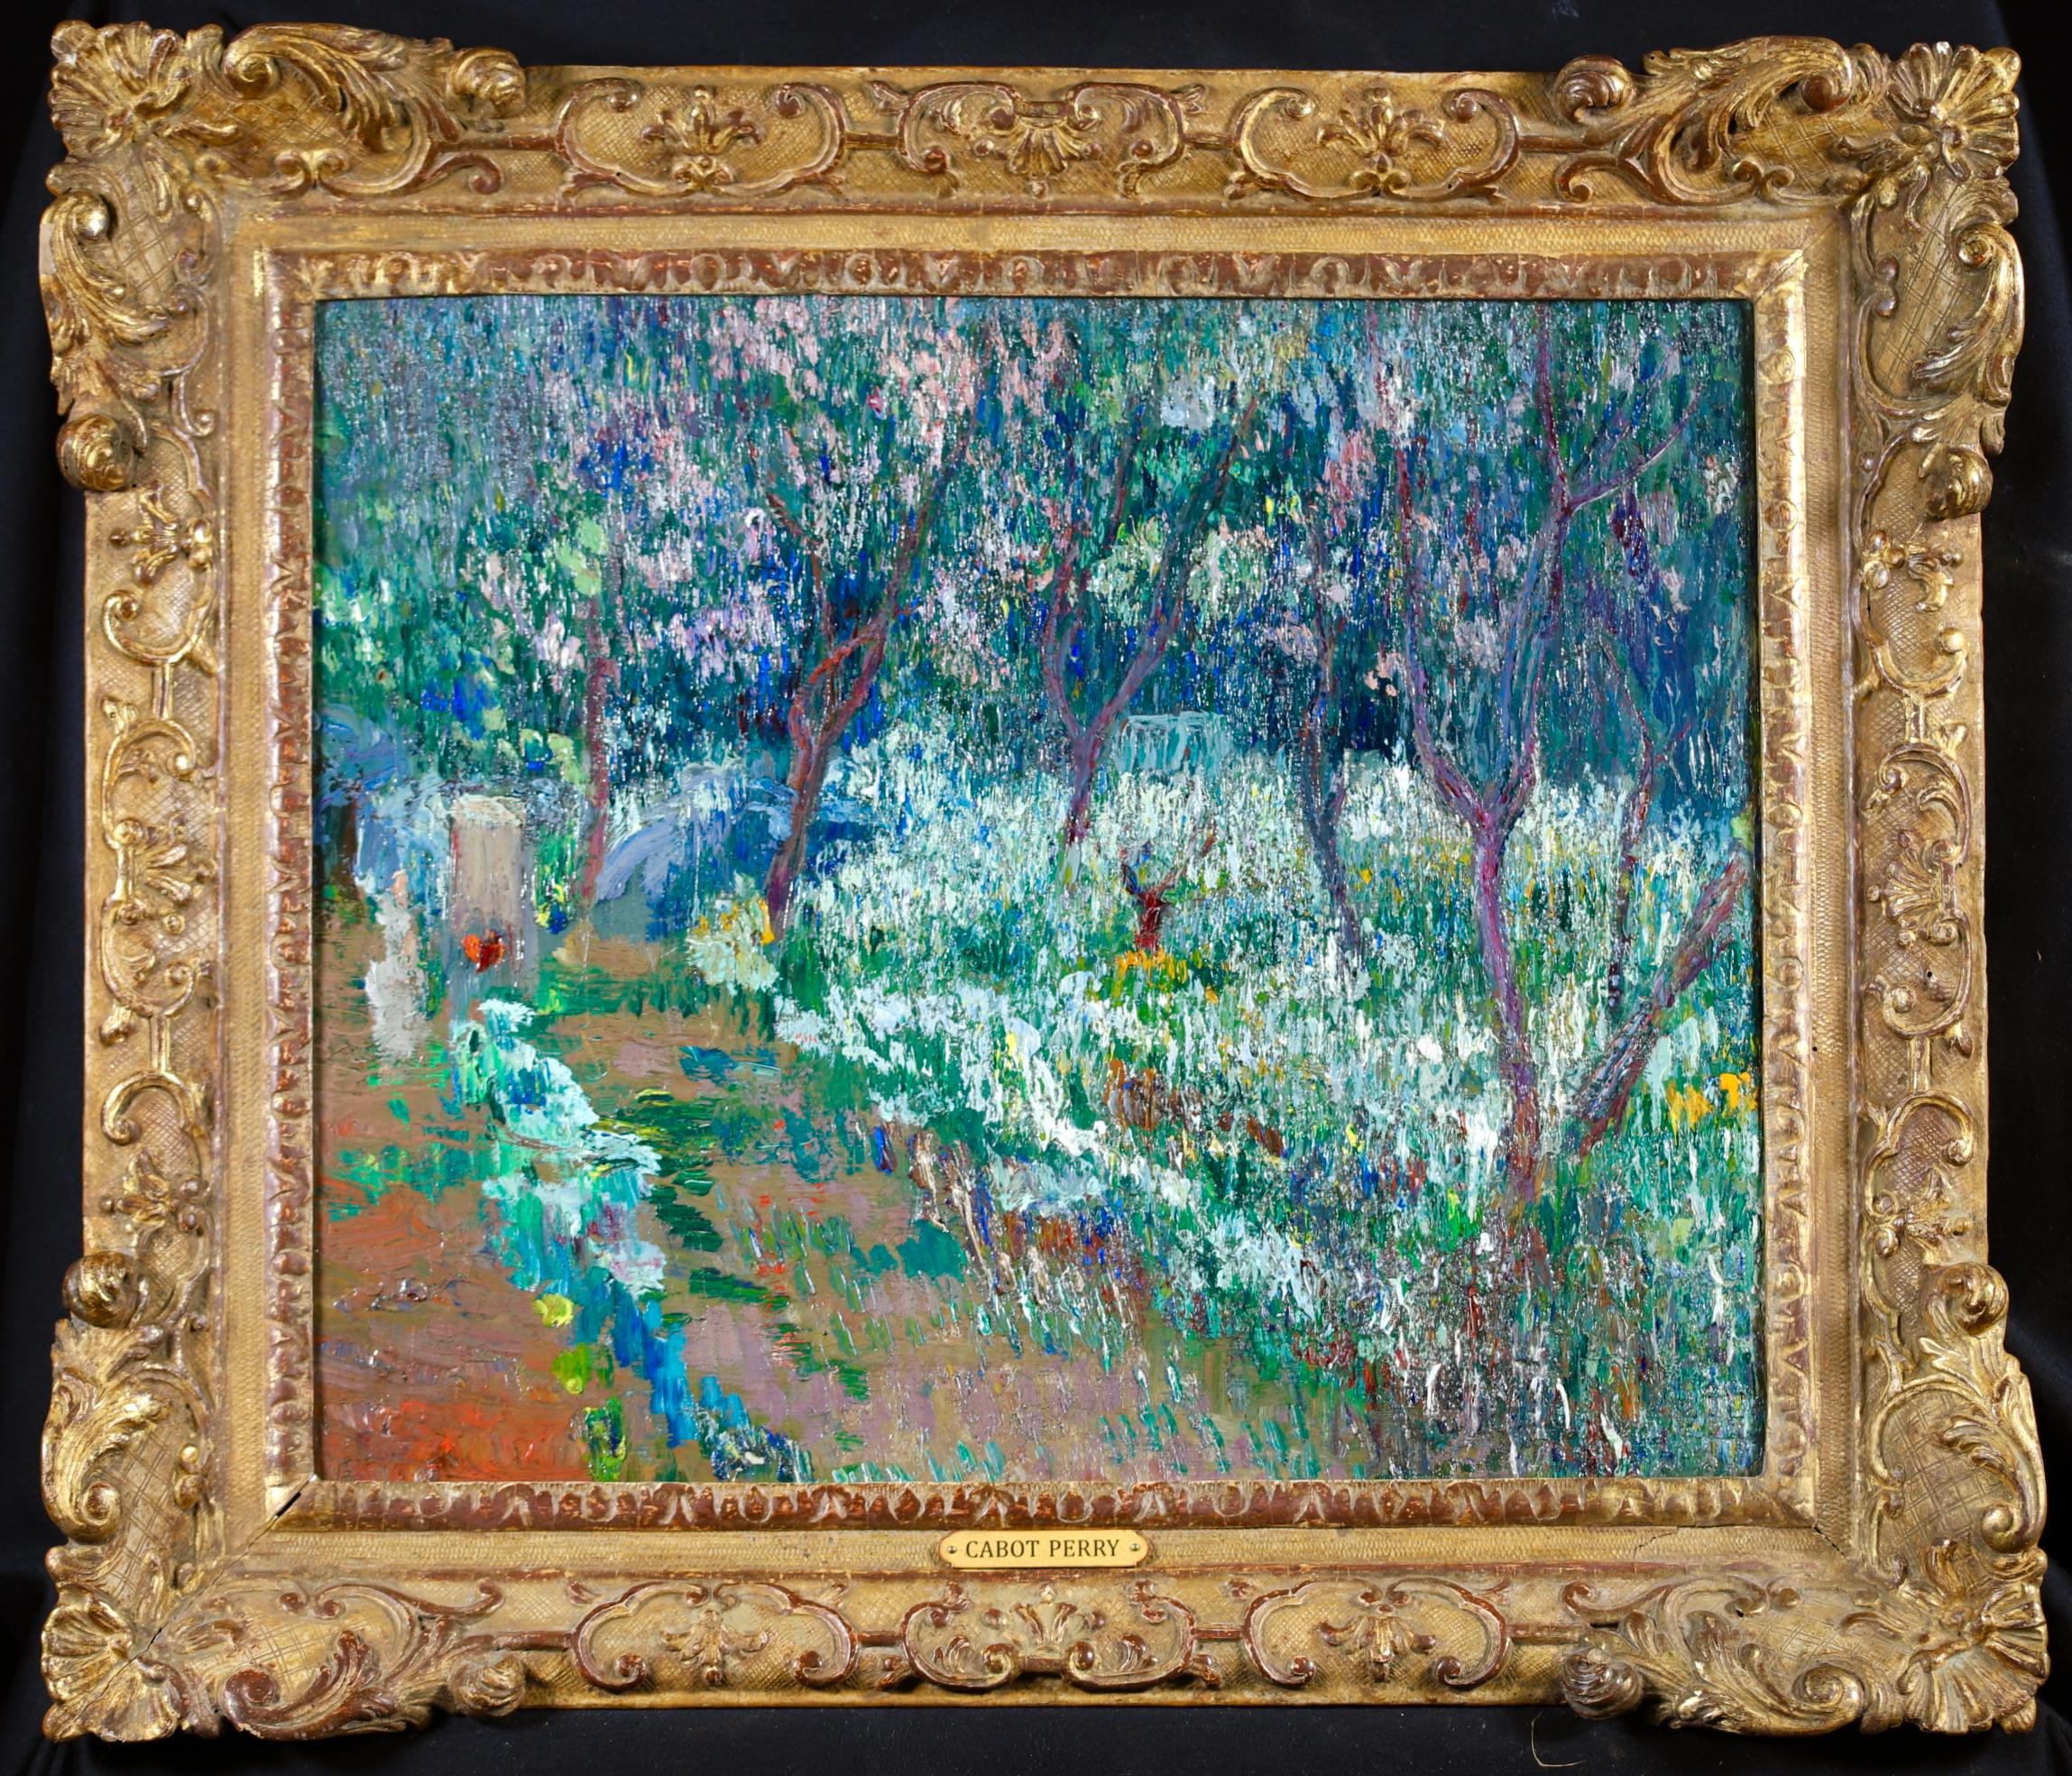 A stunning divisionist style landscape oil on canvas by American impressionist painter Lilla Cabot Perry. The work depicts a beautiful garden in Giverny in bloom. The trees are covered in pink blossom and white, blue and yellow flowers blanket the